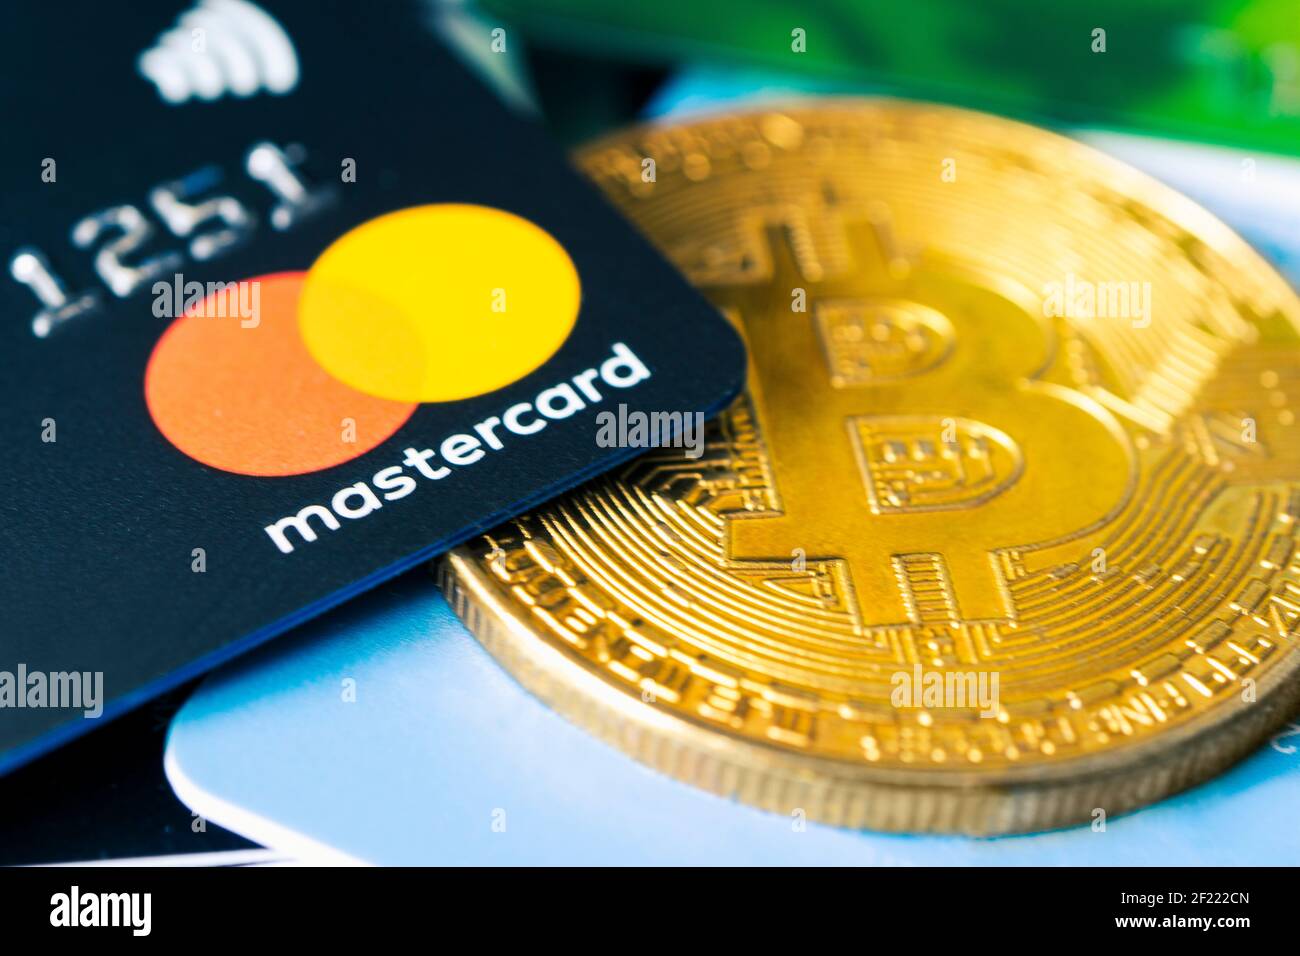 Gold bitcoin symbol and credit card master cards on the table. February 20, 2021, Barnaul, Russia Stock Photo